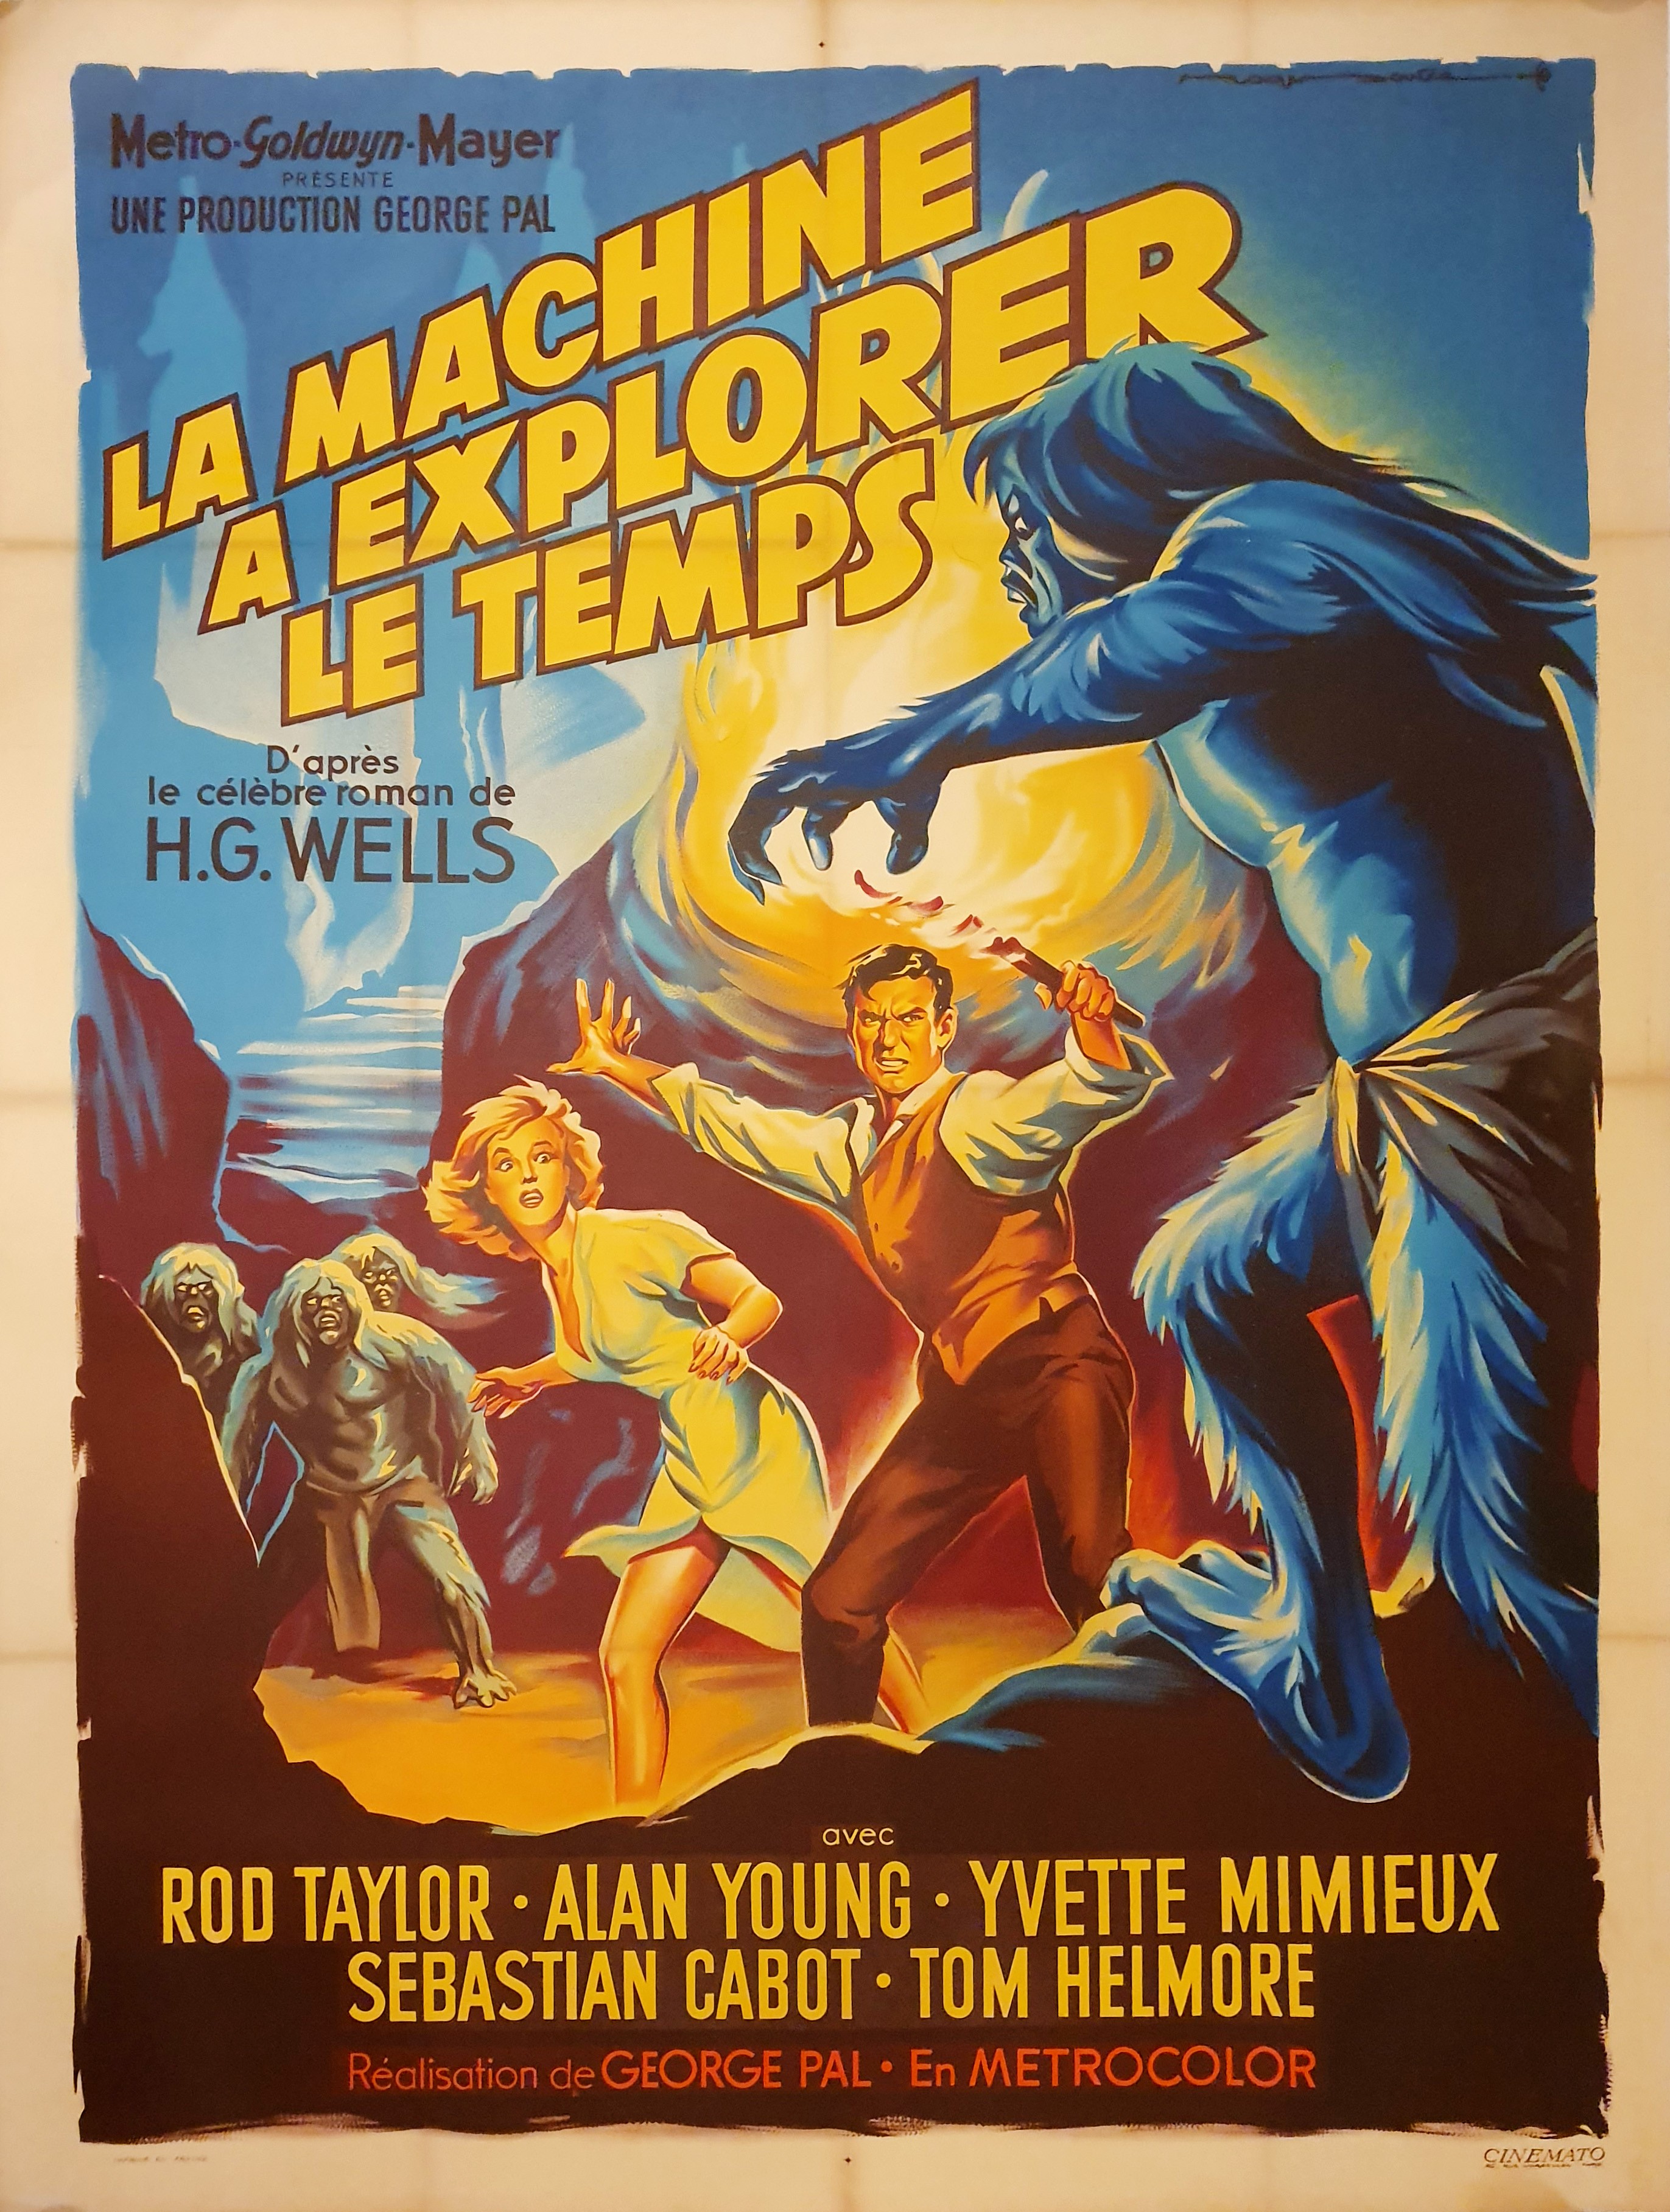 1960 vintage movie advertising poster reproduction. The Time Machine 